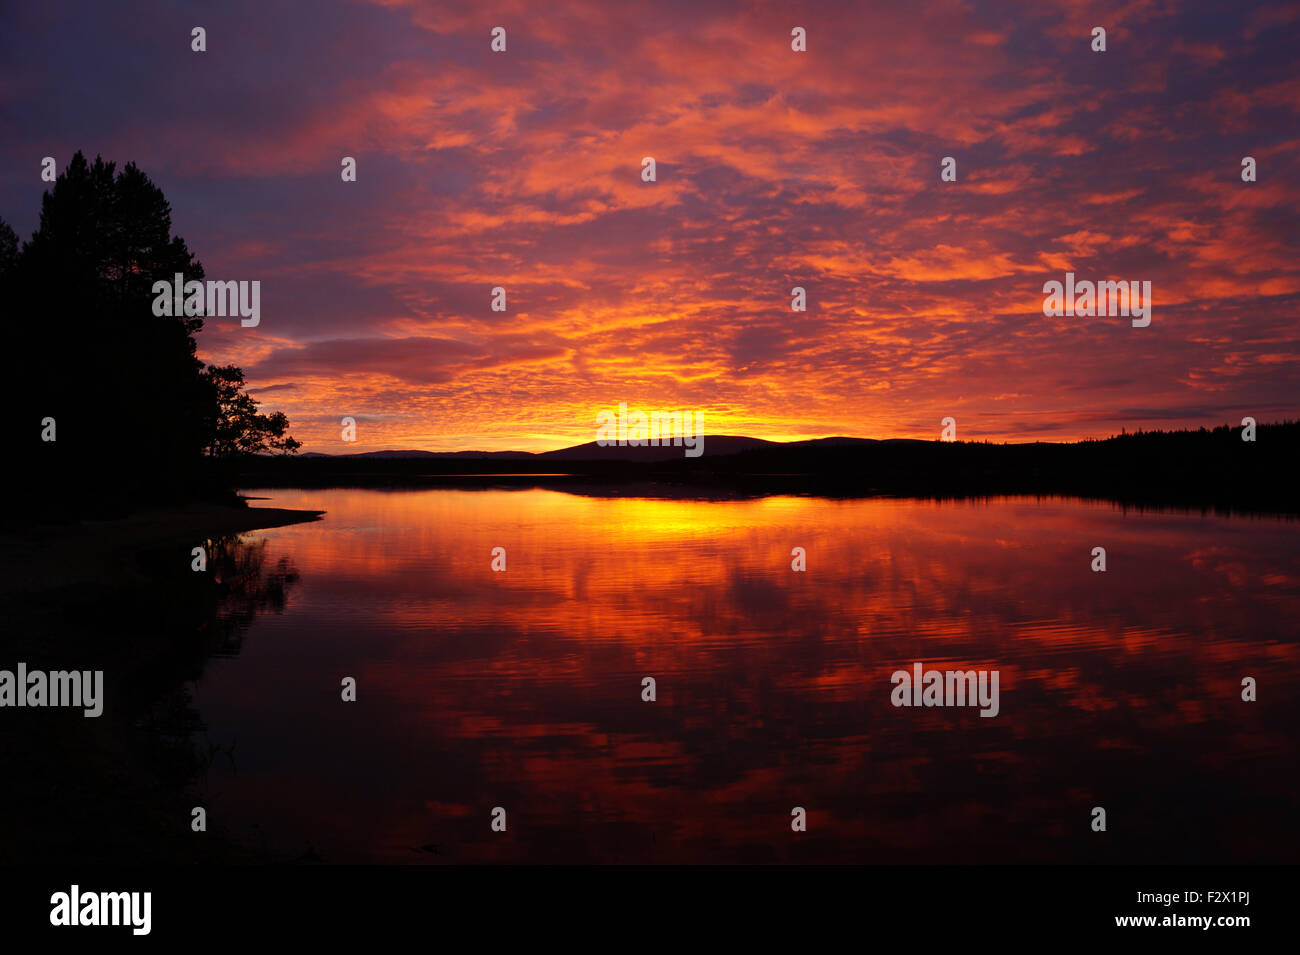 Loch Morlich Colorful Sunset clouds horizon landscape with tree Stock Photo